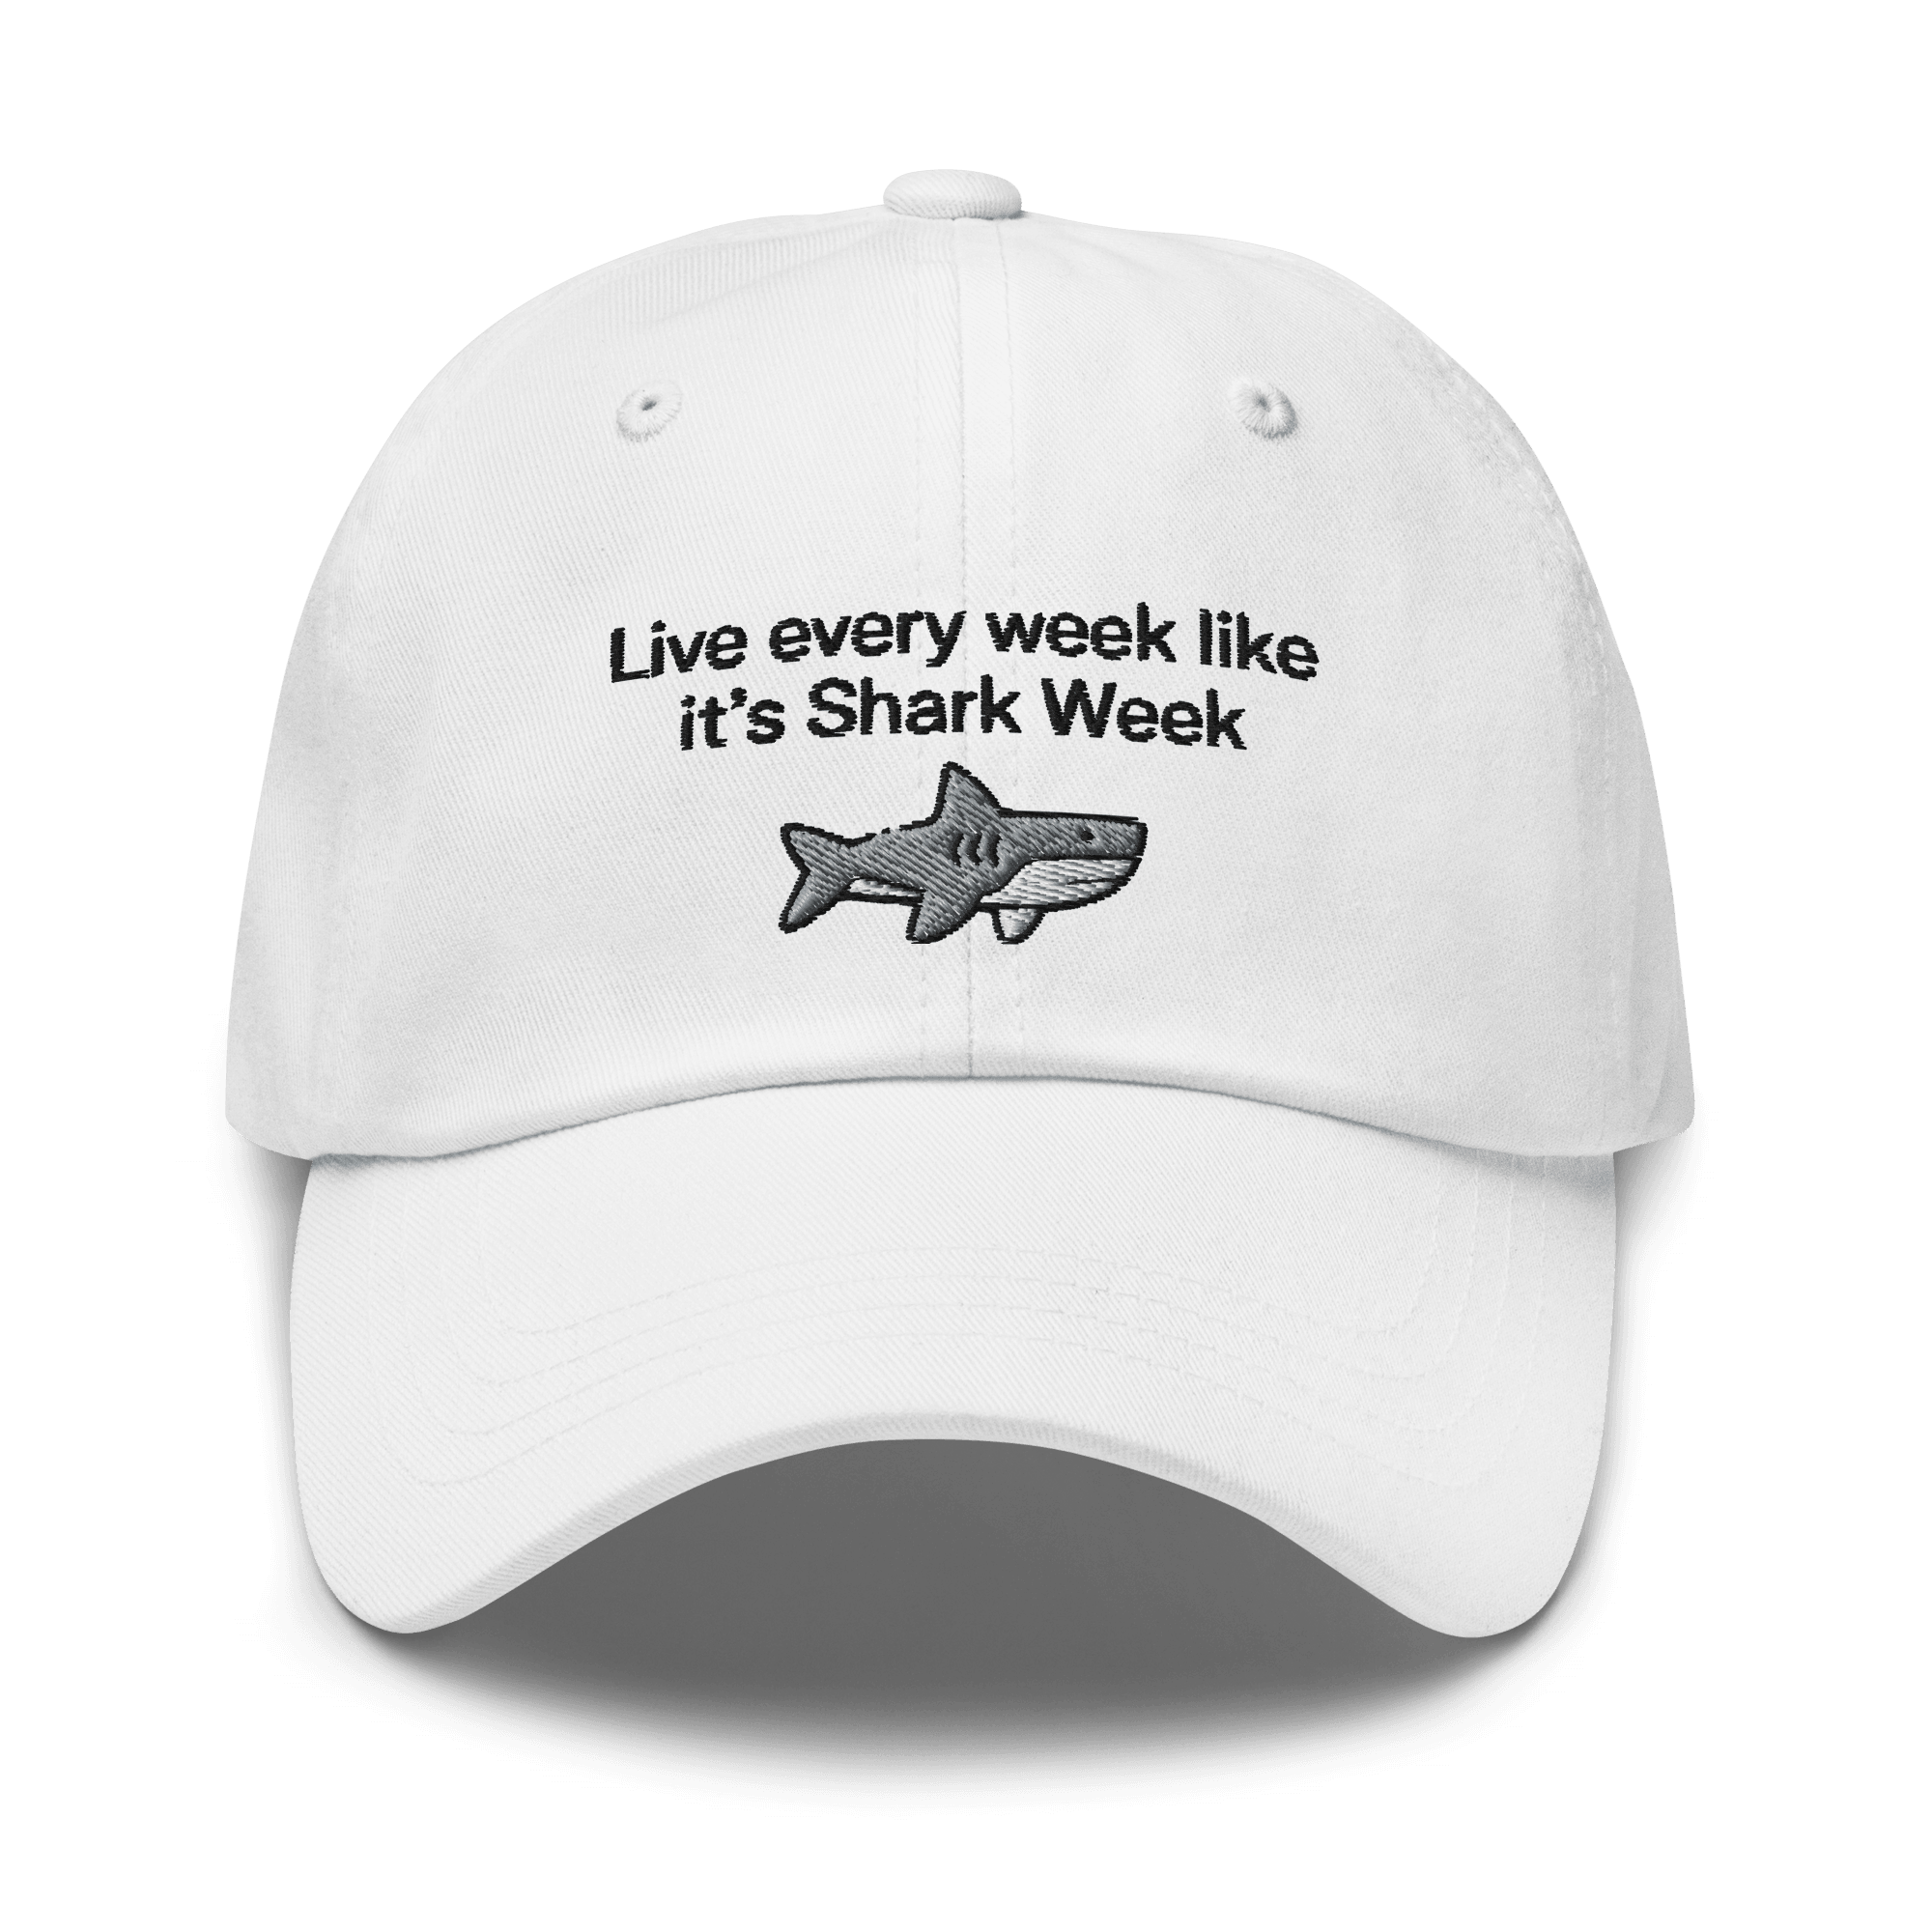 Live every week like it's Shark Week Embroidered Hat - Polychrome Goods 🍊